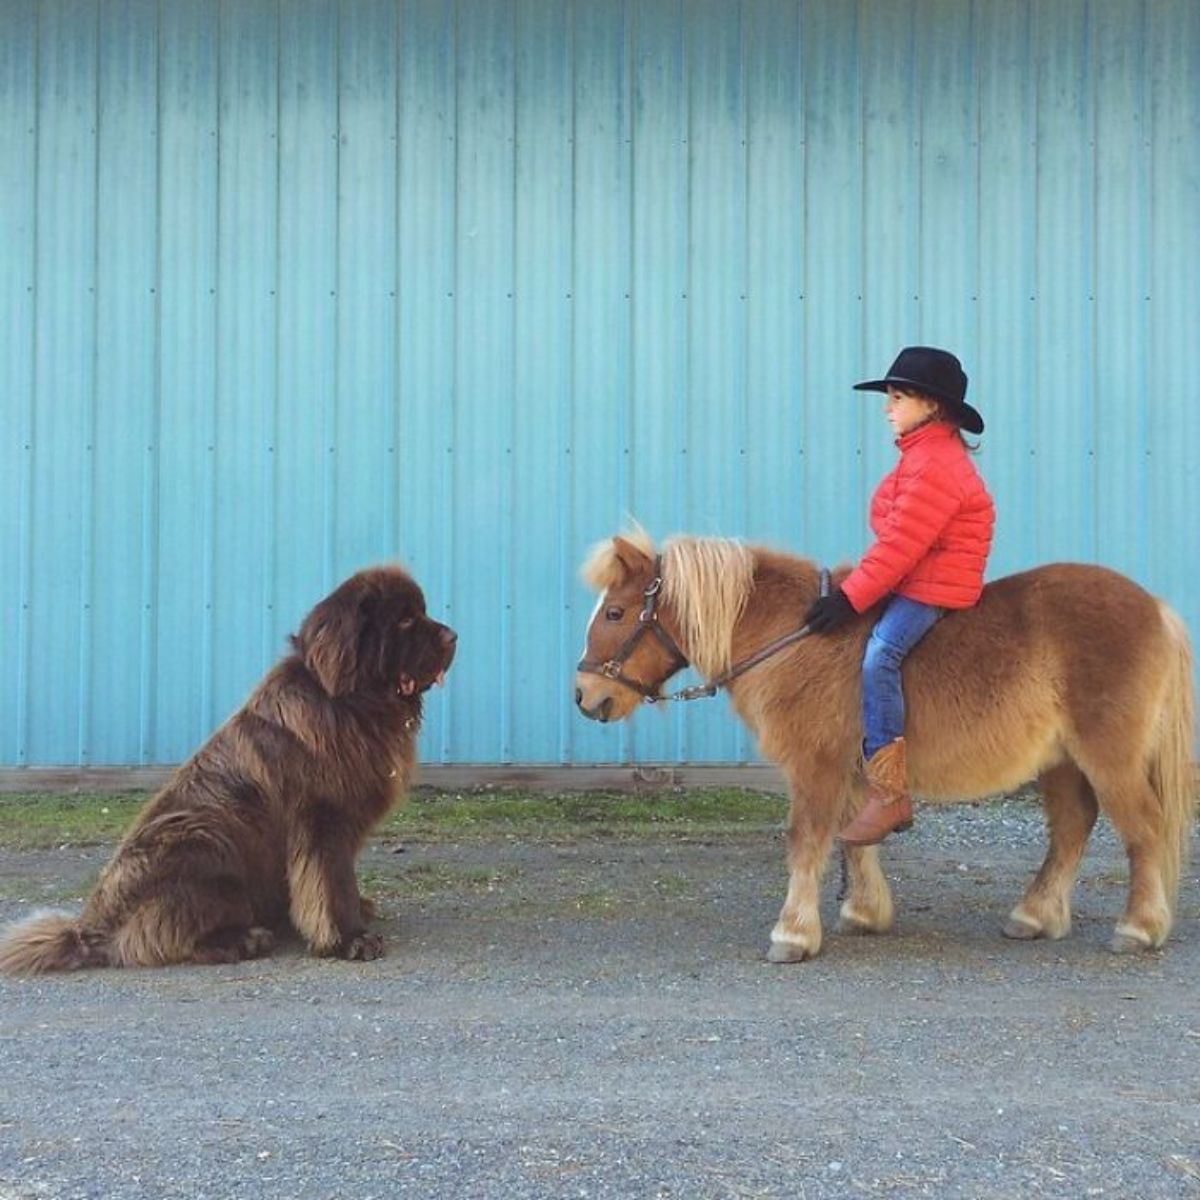 brown newfoundland sitting in front of a child sitting on a brown pony